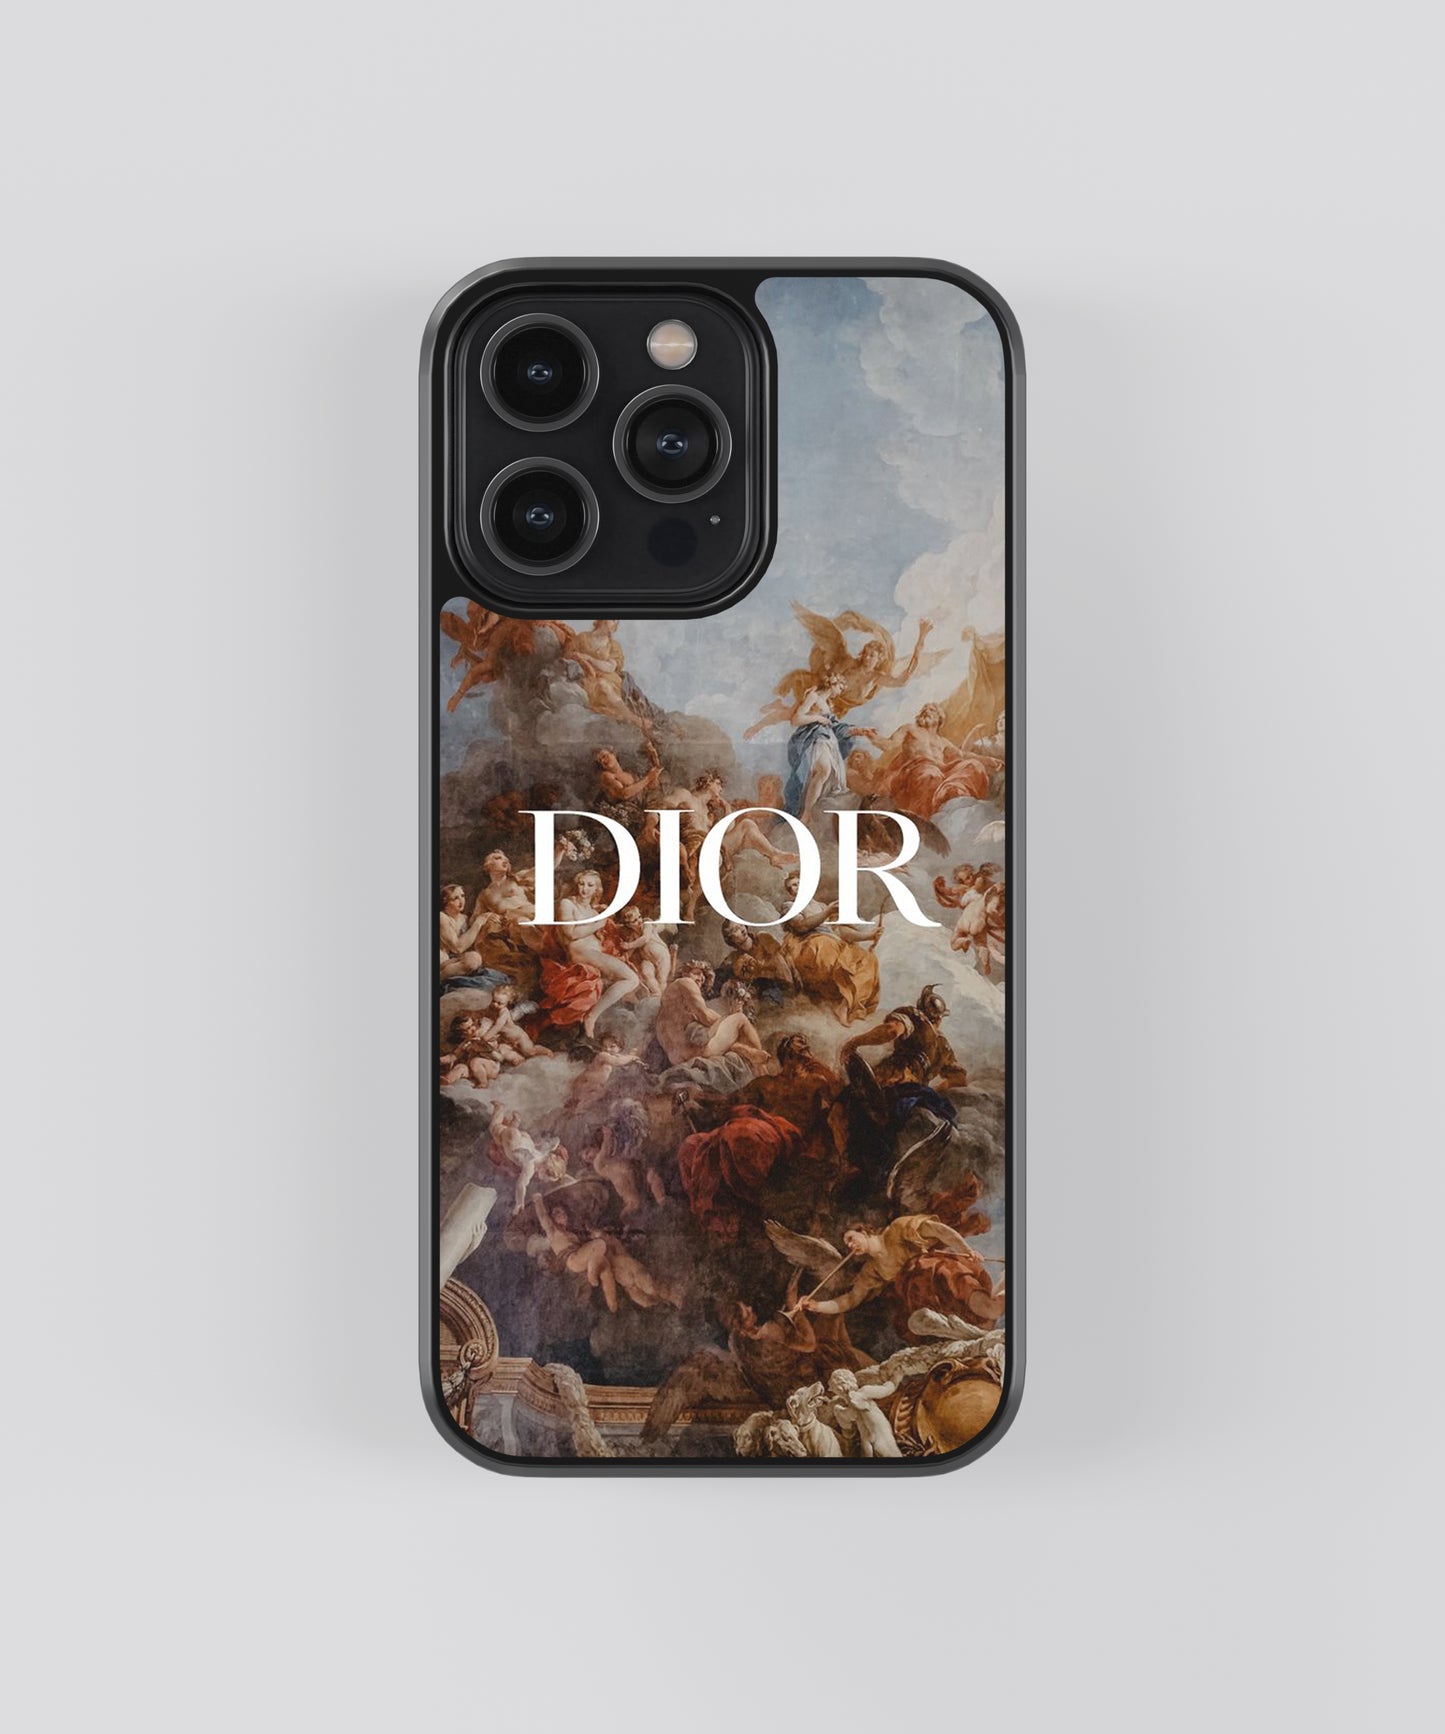 Dior Vintage Glass Phone Case Cover - Aesthetic Phone Cases - Culltique